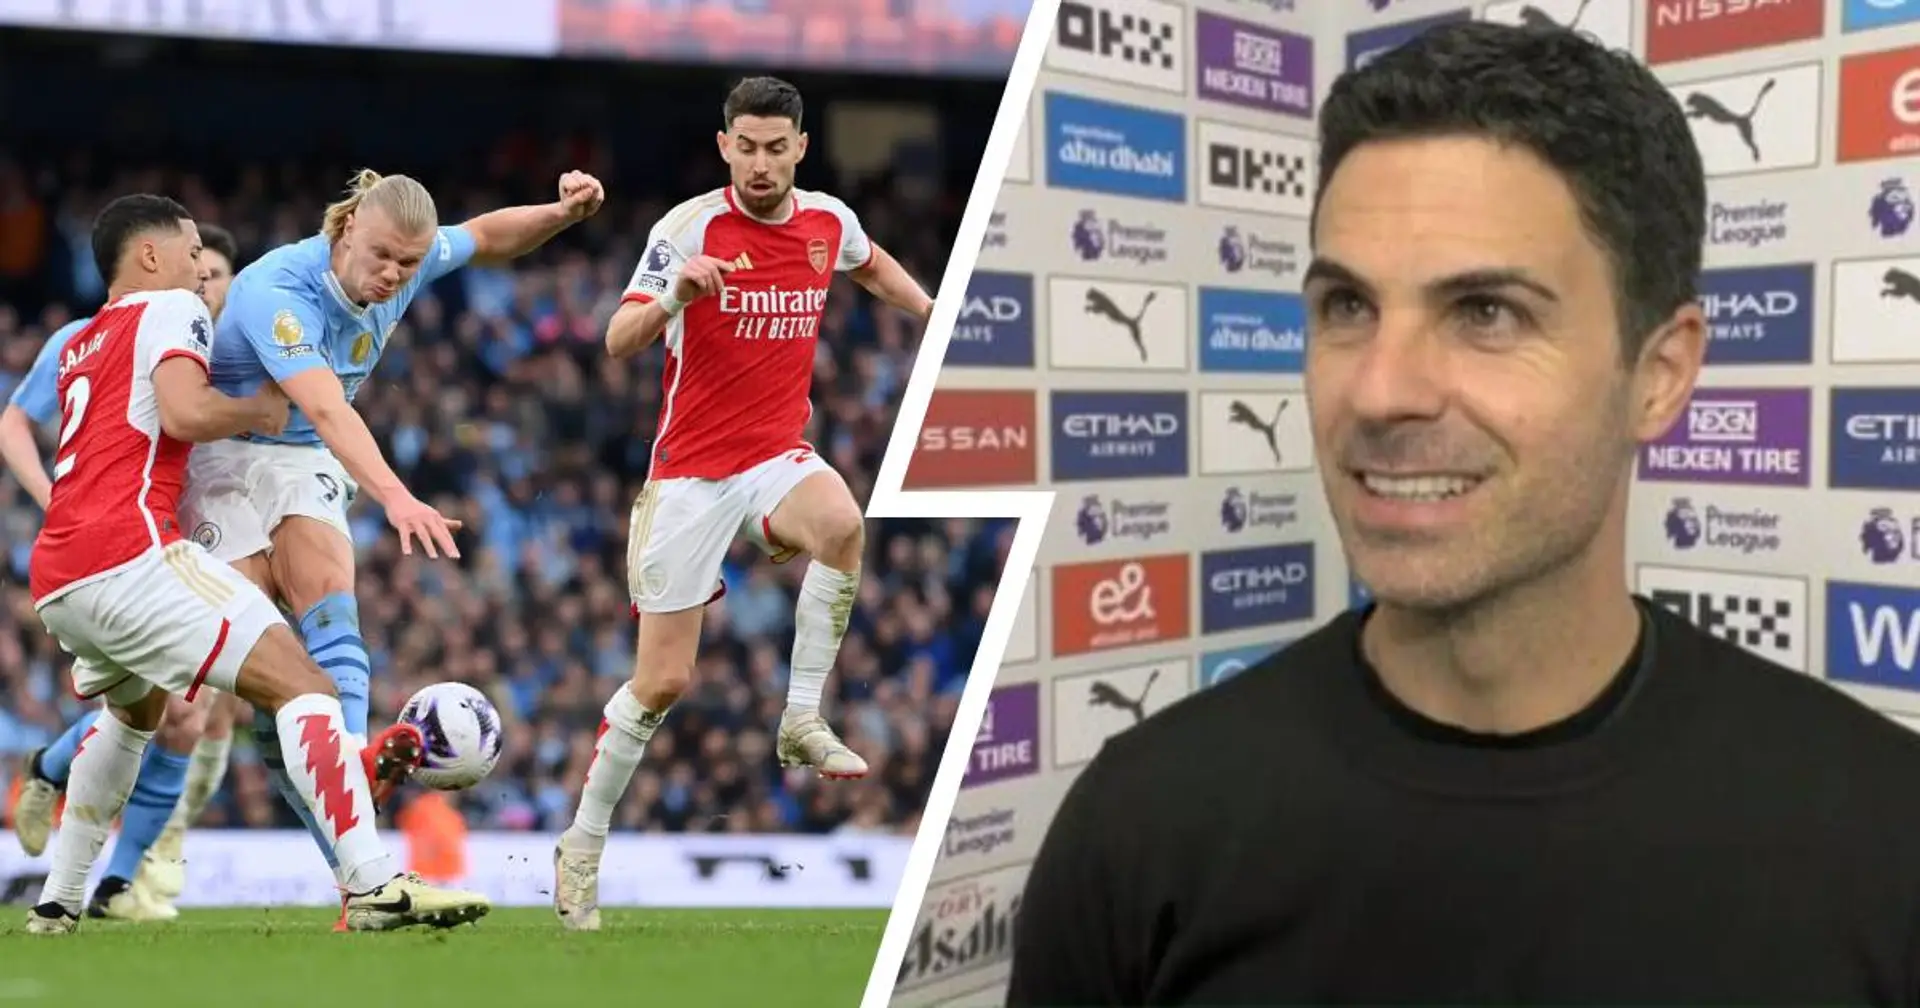 'Are you ready to follow 30 passes?': Mikel Arteta defends low possession vs Man City